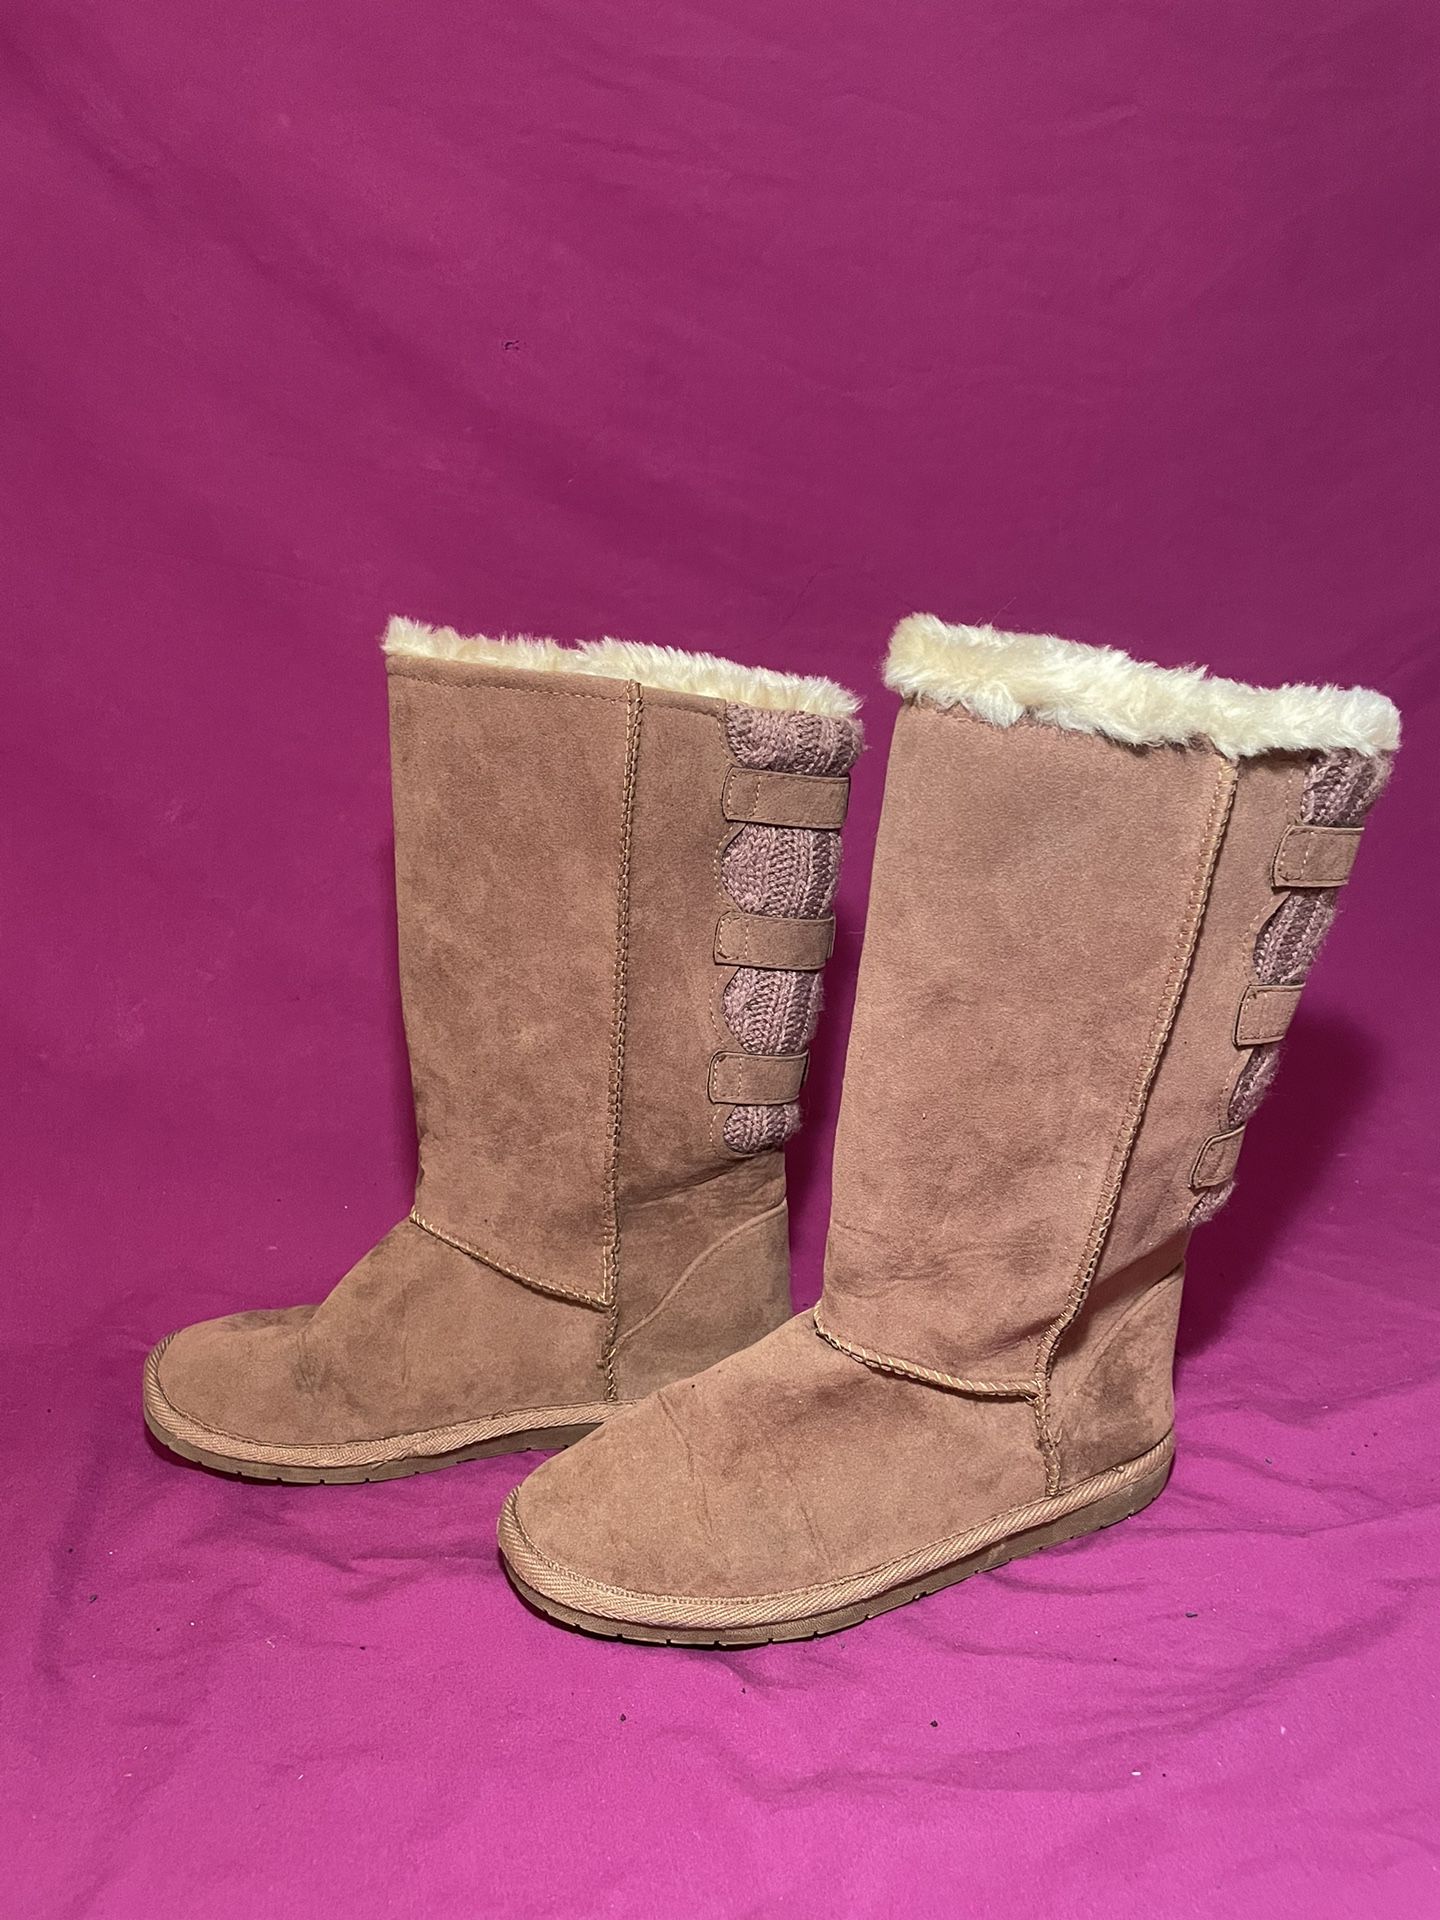 Fuzzy Boots Size 7